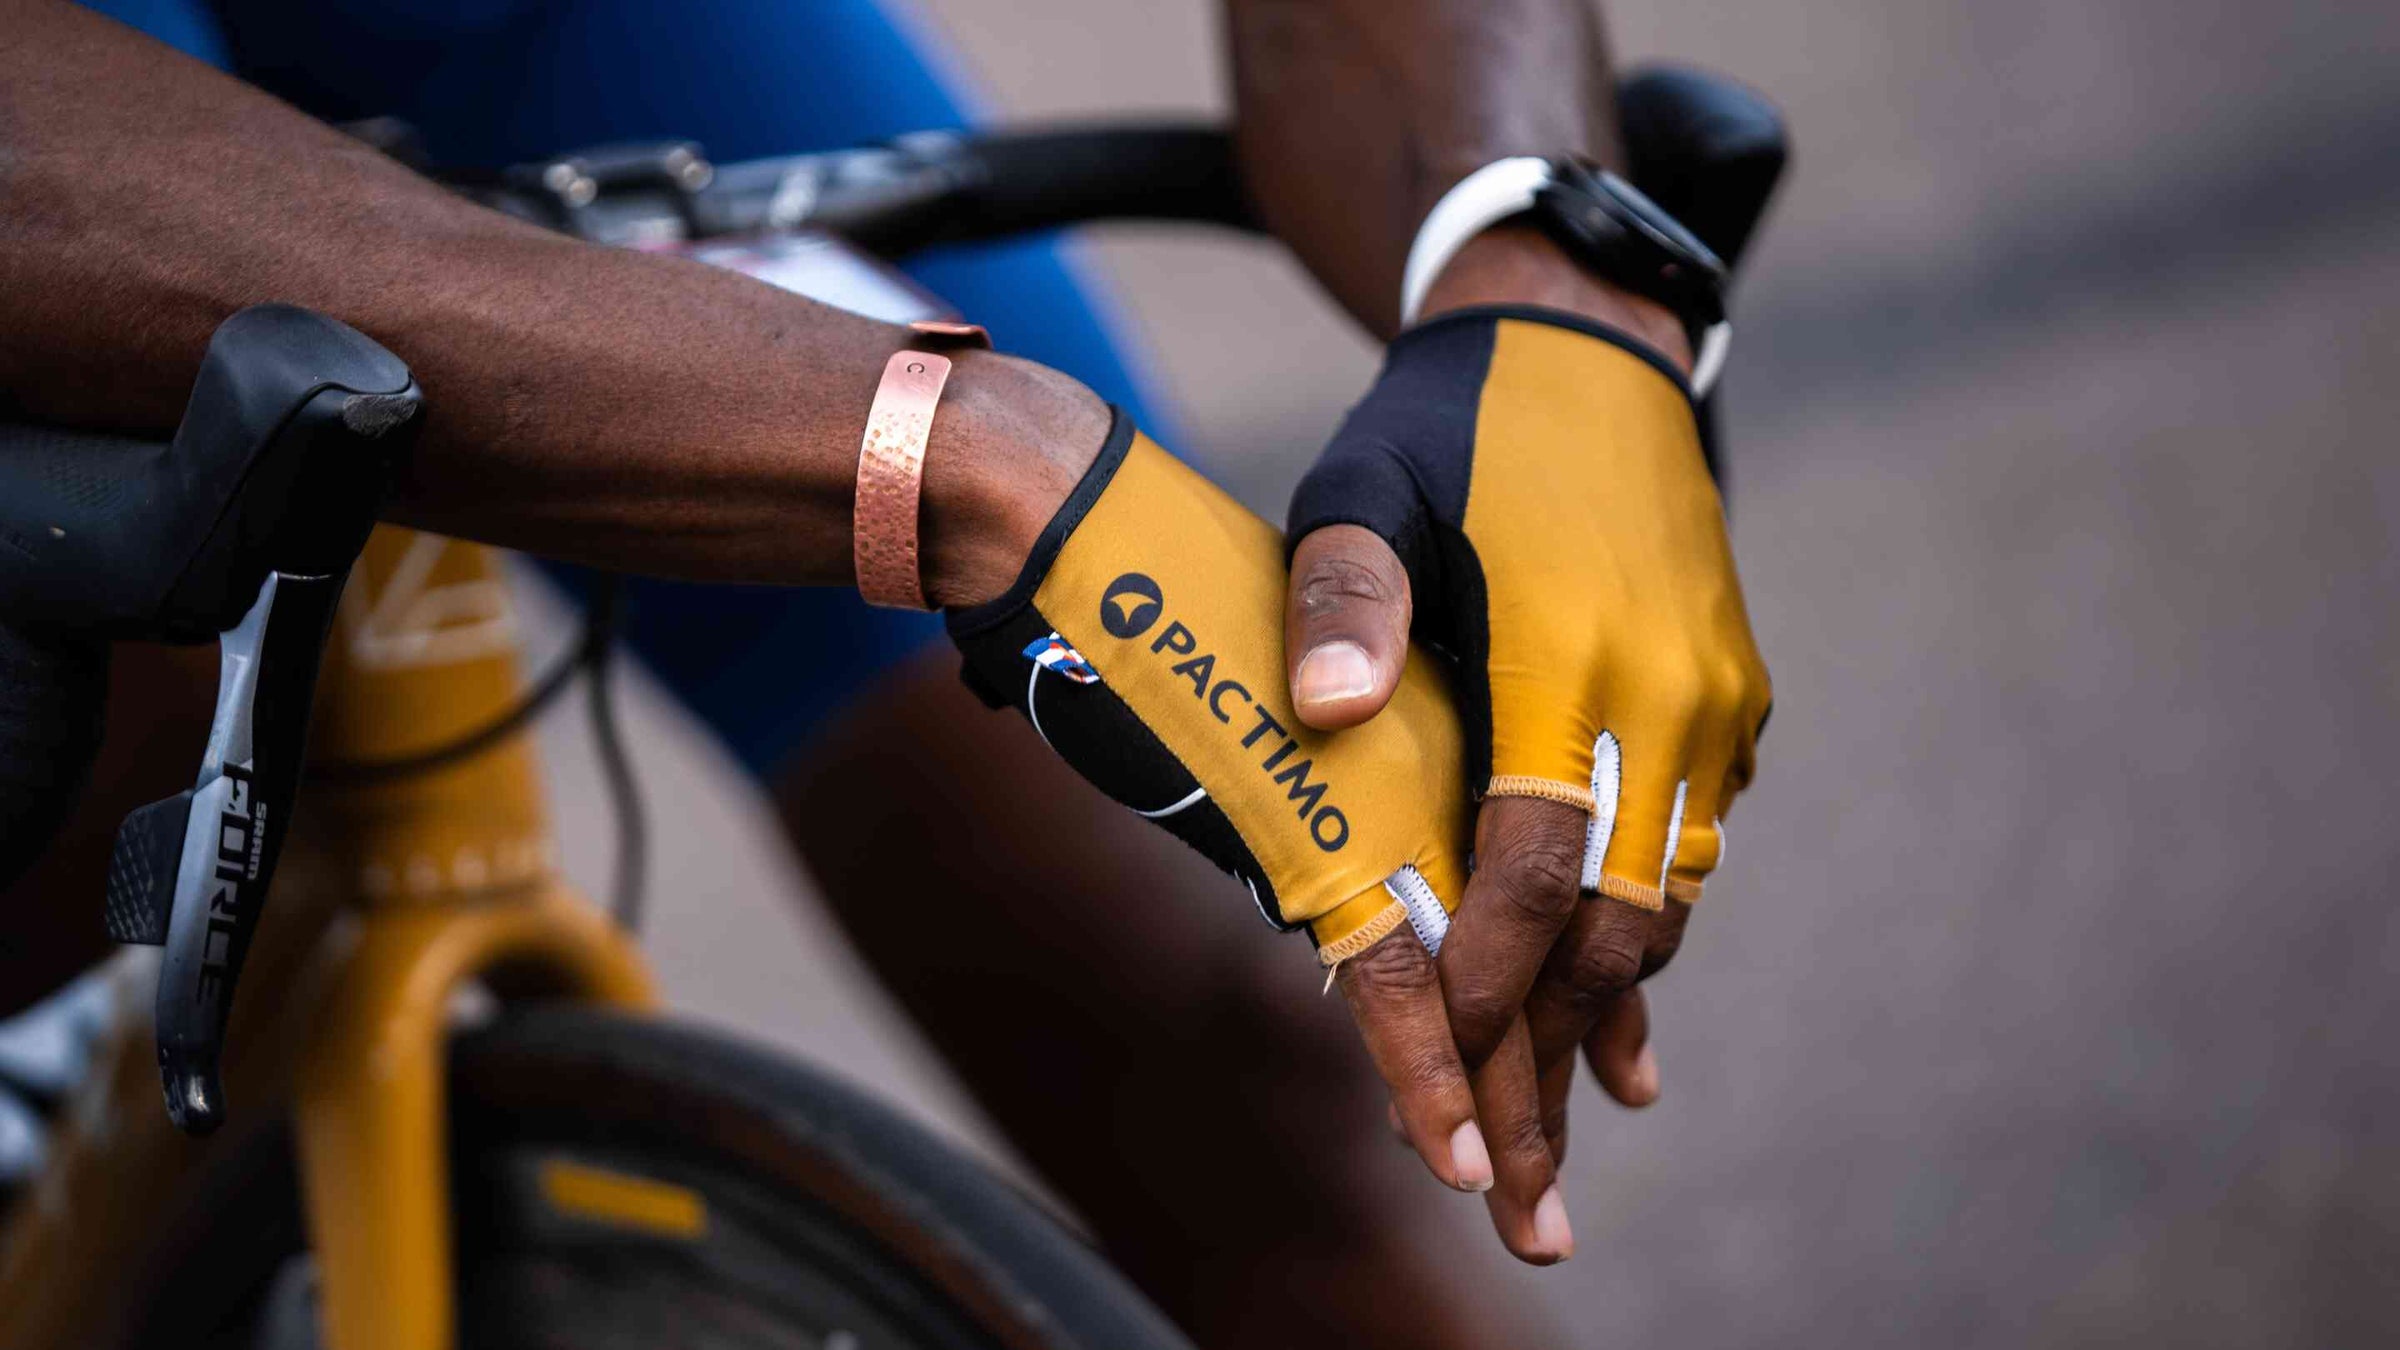 Cycling Accessories for Men: Gloves, Caps, Socks, Bags